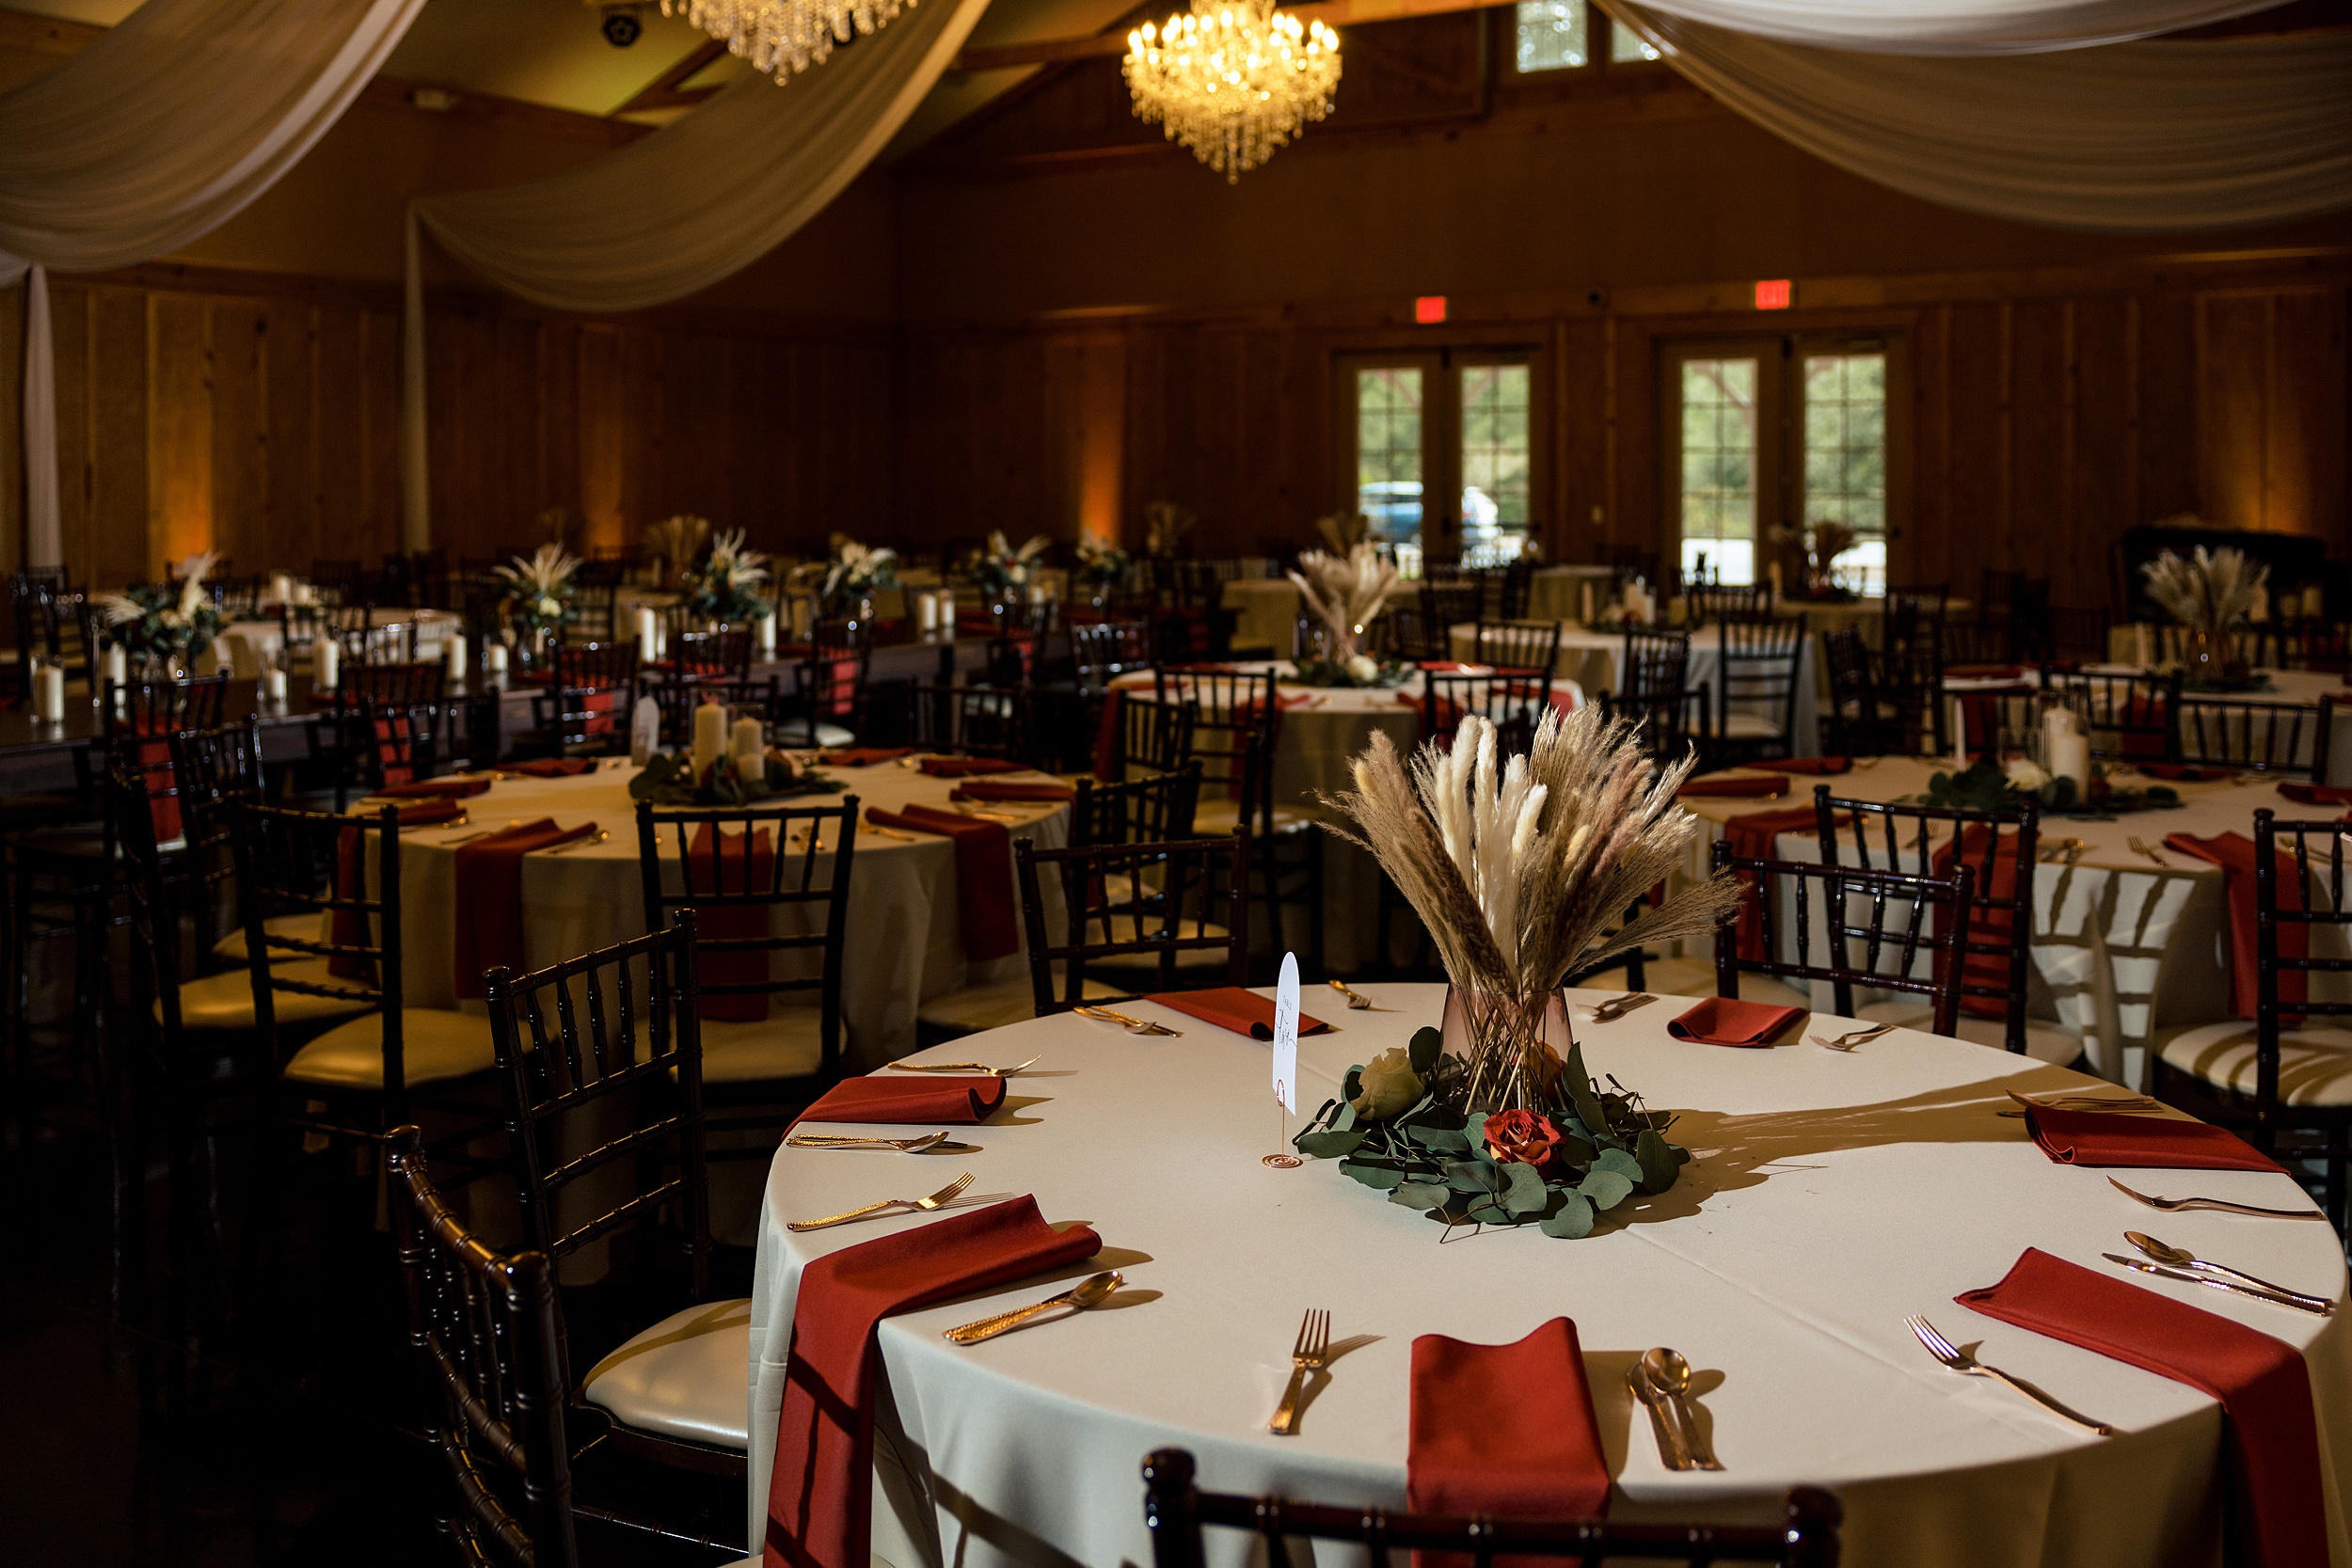 A bowing oaks wedding reception set up with white linens and red napkins